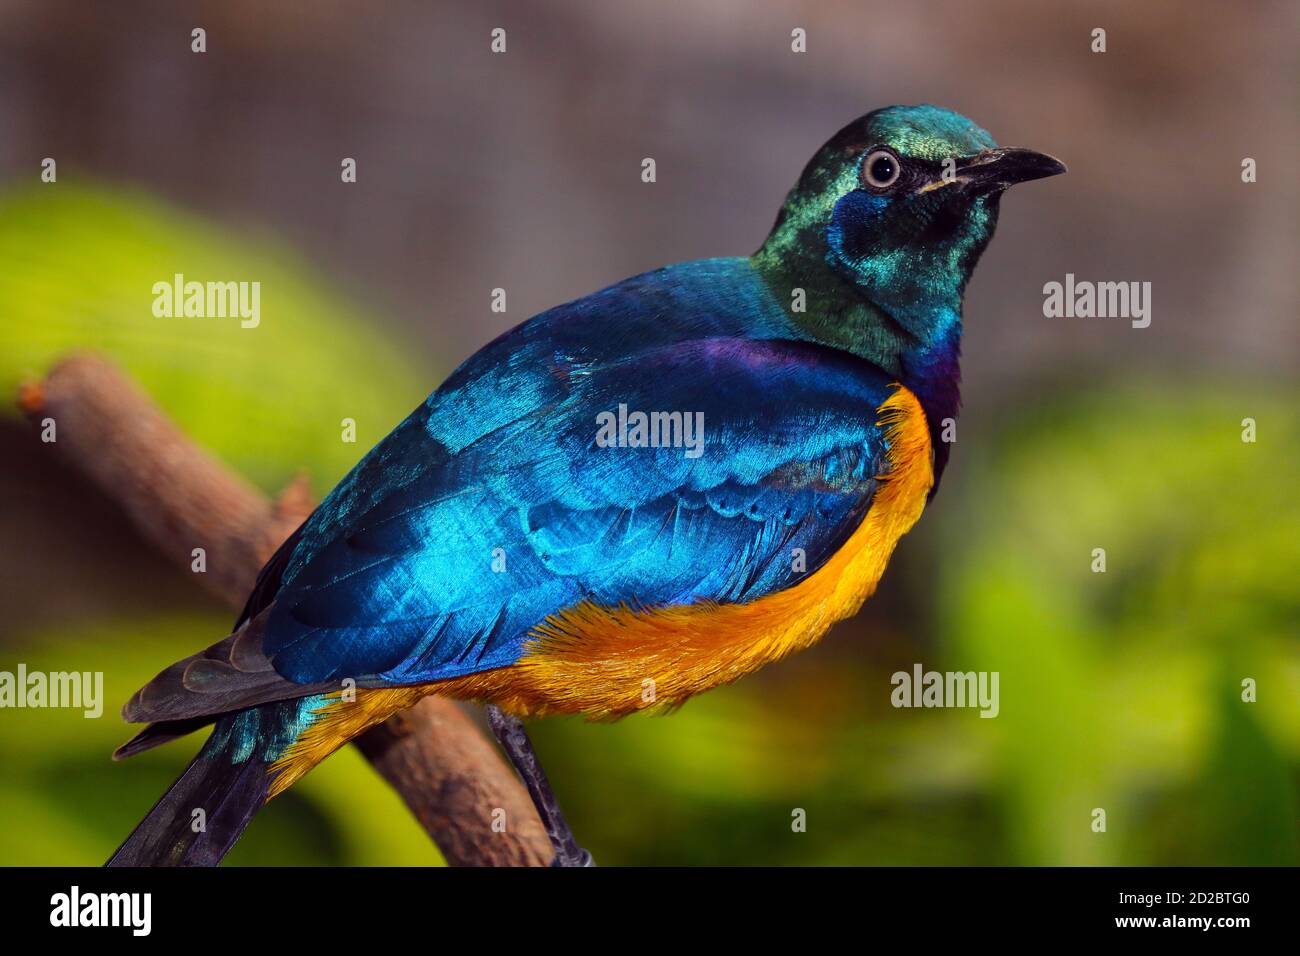 Colorful shimmering golden-breasted starling, lamprotornis regius in side view sitting on a branch Stock Photo